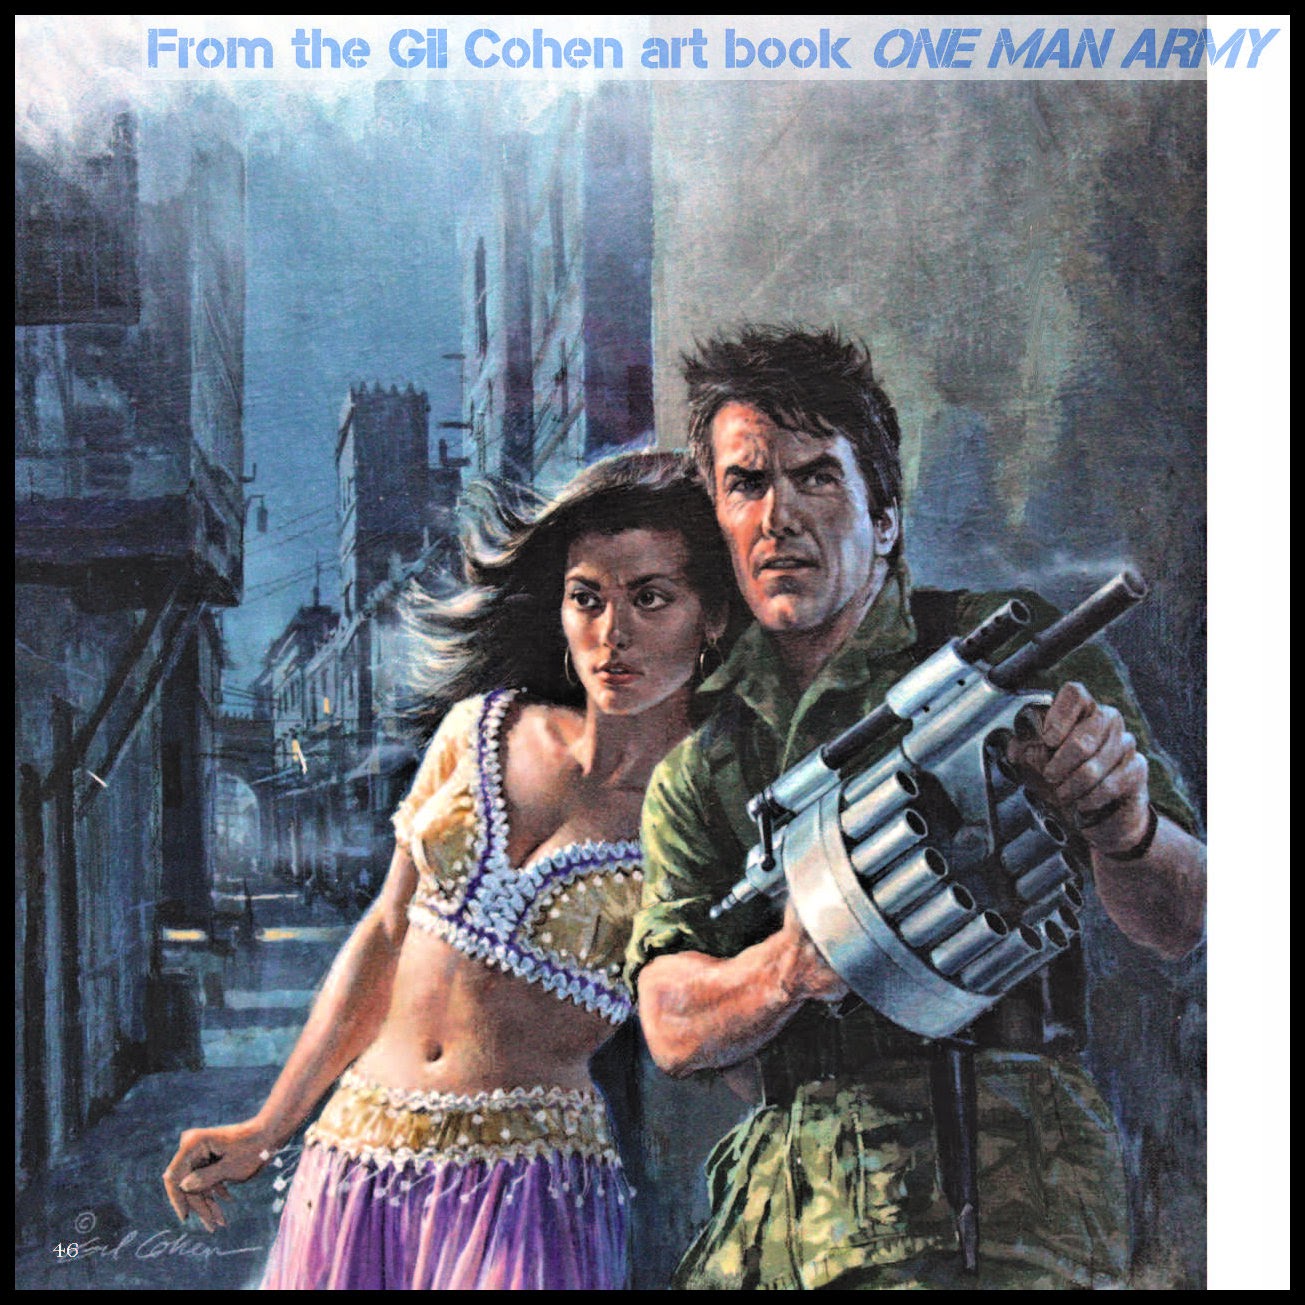 One Man Army The Action Paperback Art Of Gil Cohen Our Latest Book The Men S Adventure Magazines Blog